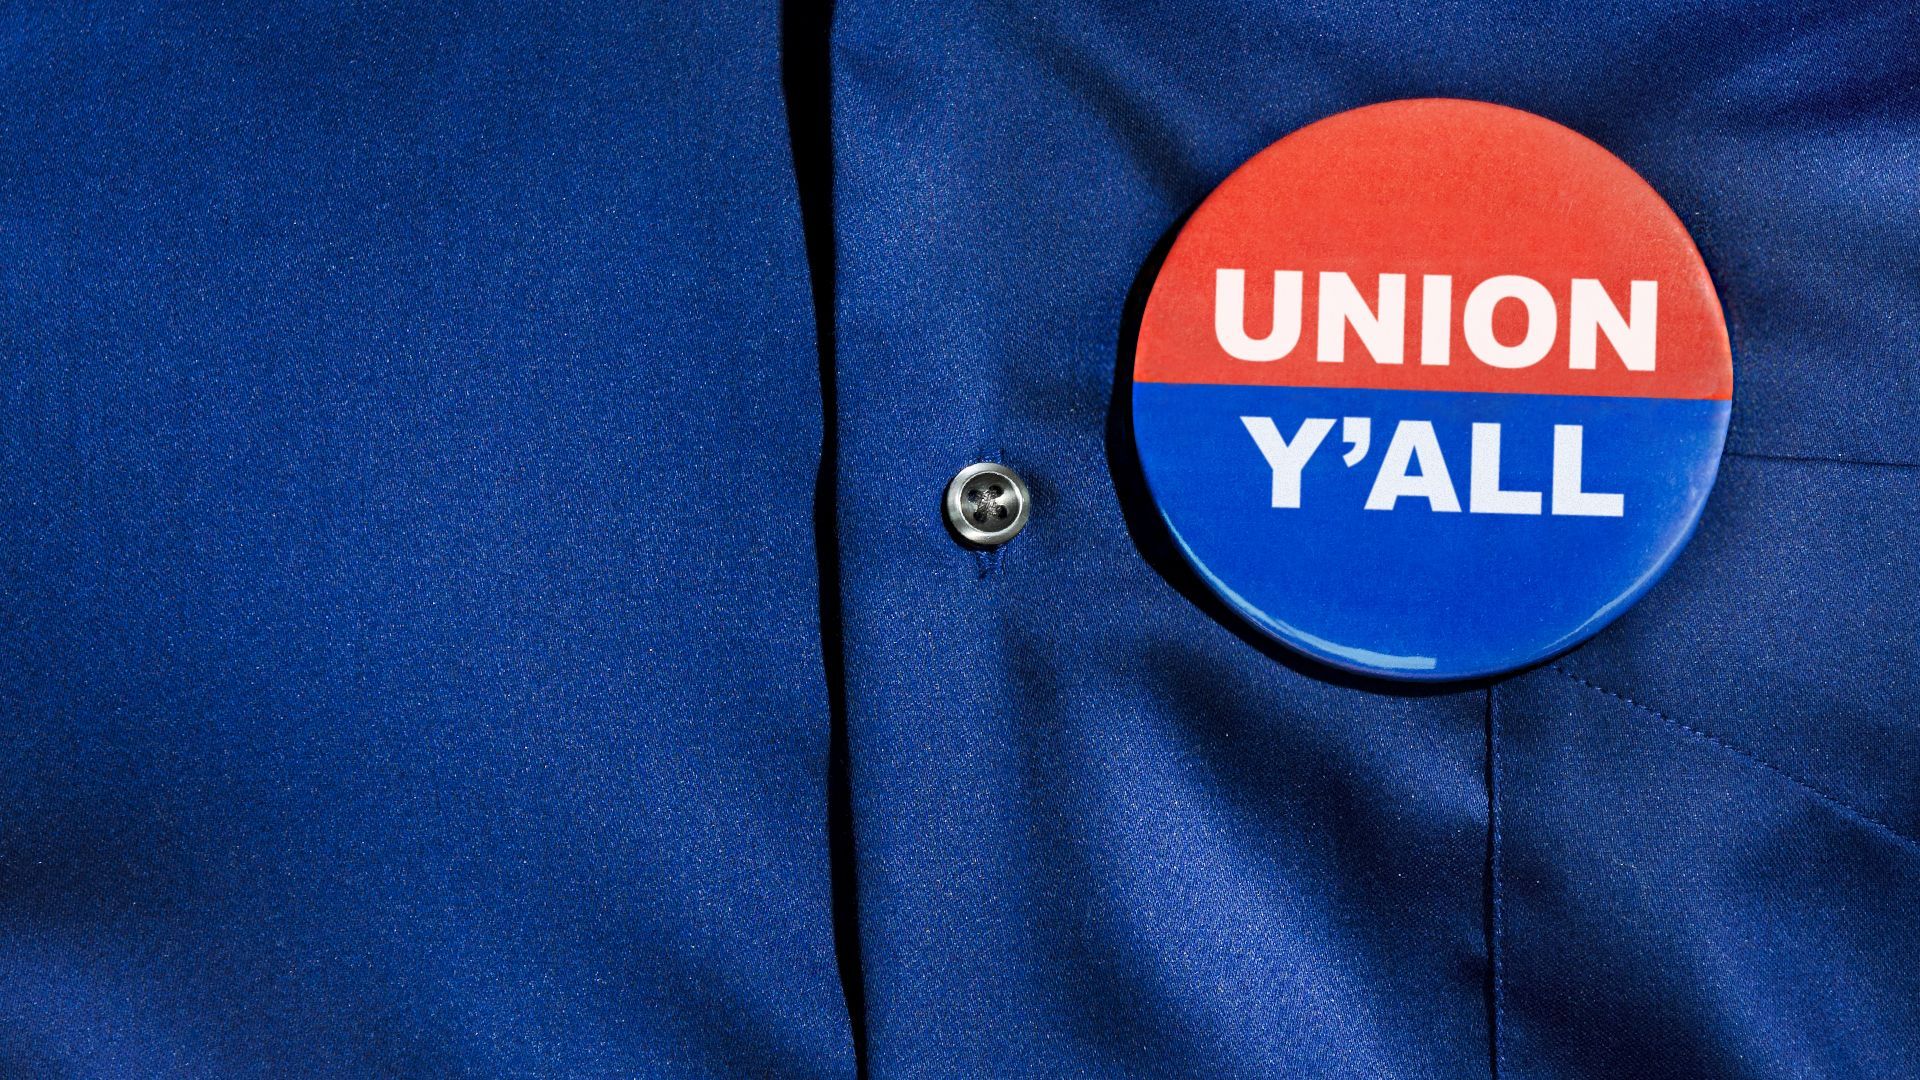 Illustration of a "Union Y'all" two color pin on a button up shirt